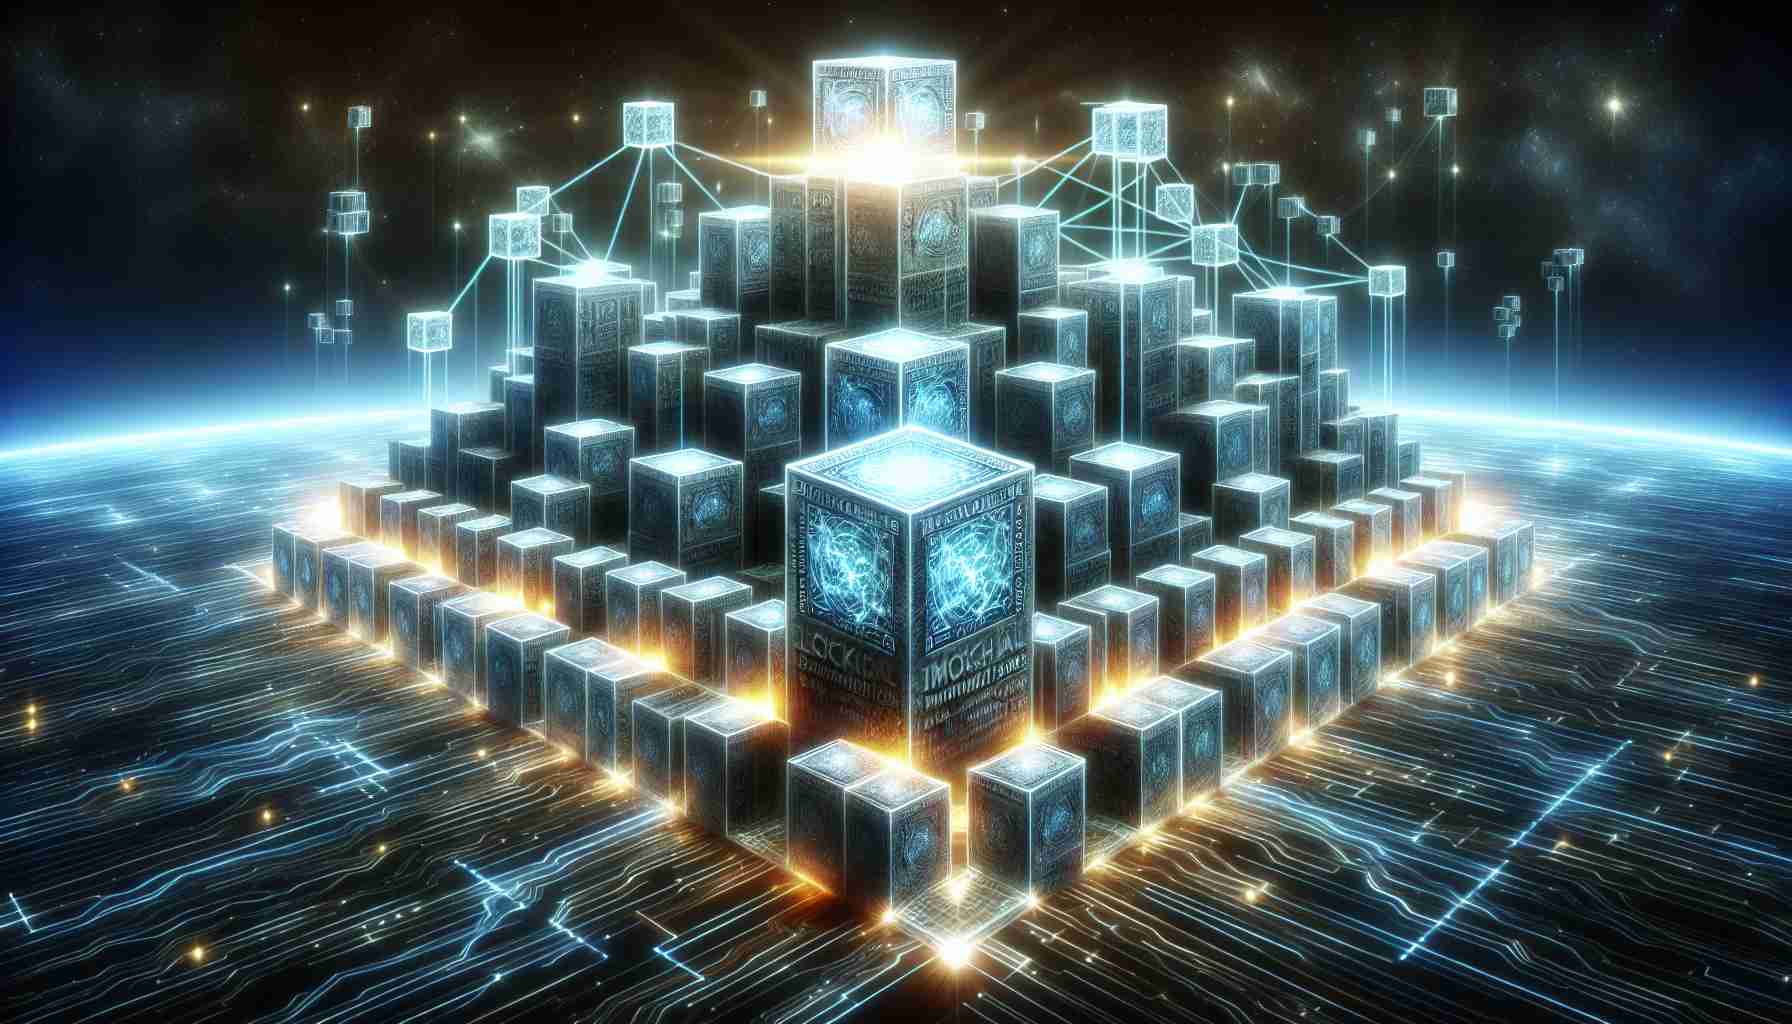 An ultra-high-definition visual representation demonstrating the concept of an Immortal Blockchain Storage's emergence. The picture should illustrate the blockchain concept with interlinked blocks of information that are undying, representing permanence and immortality. The whole scenario must depict the concept of blockchain technology's emergence, portraying a progressive evolution. The scene might include the images of 3D blocks, networks, glowing lines to symbolize data and cryptography, shining brightly, suggesting the constant and unending nature of the storage system.